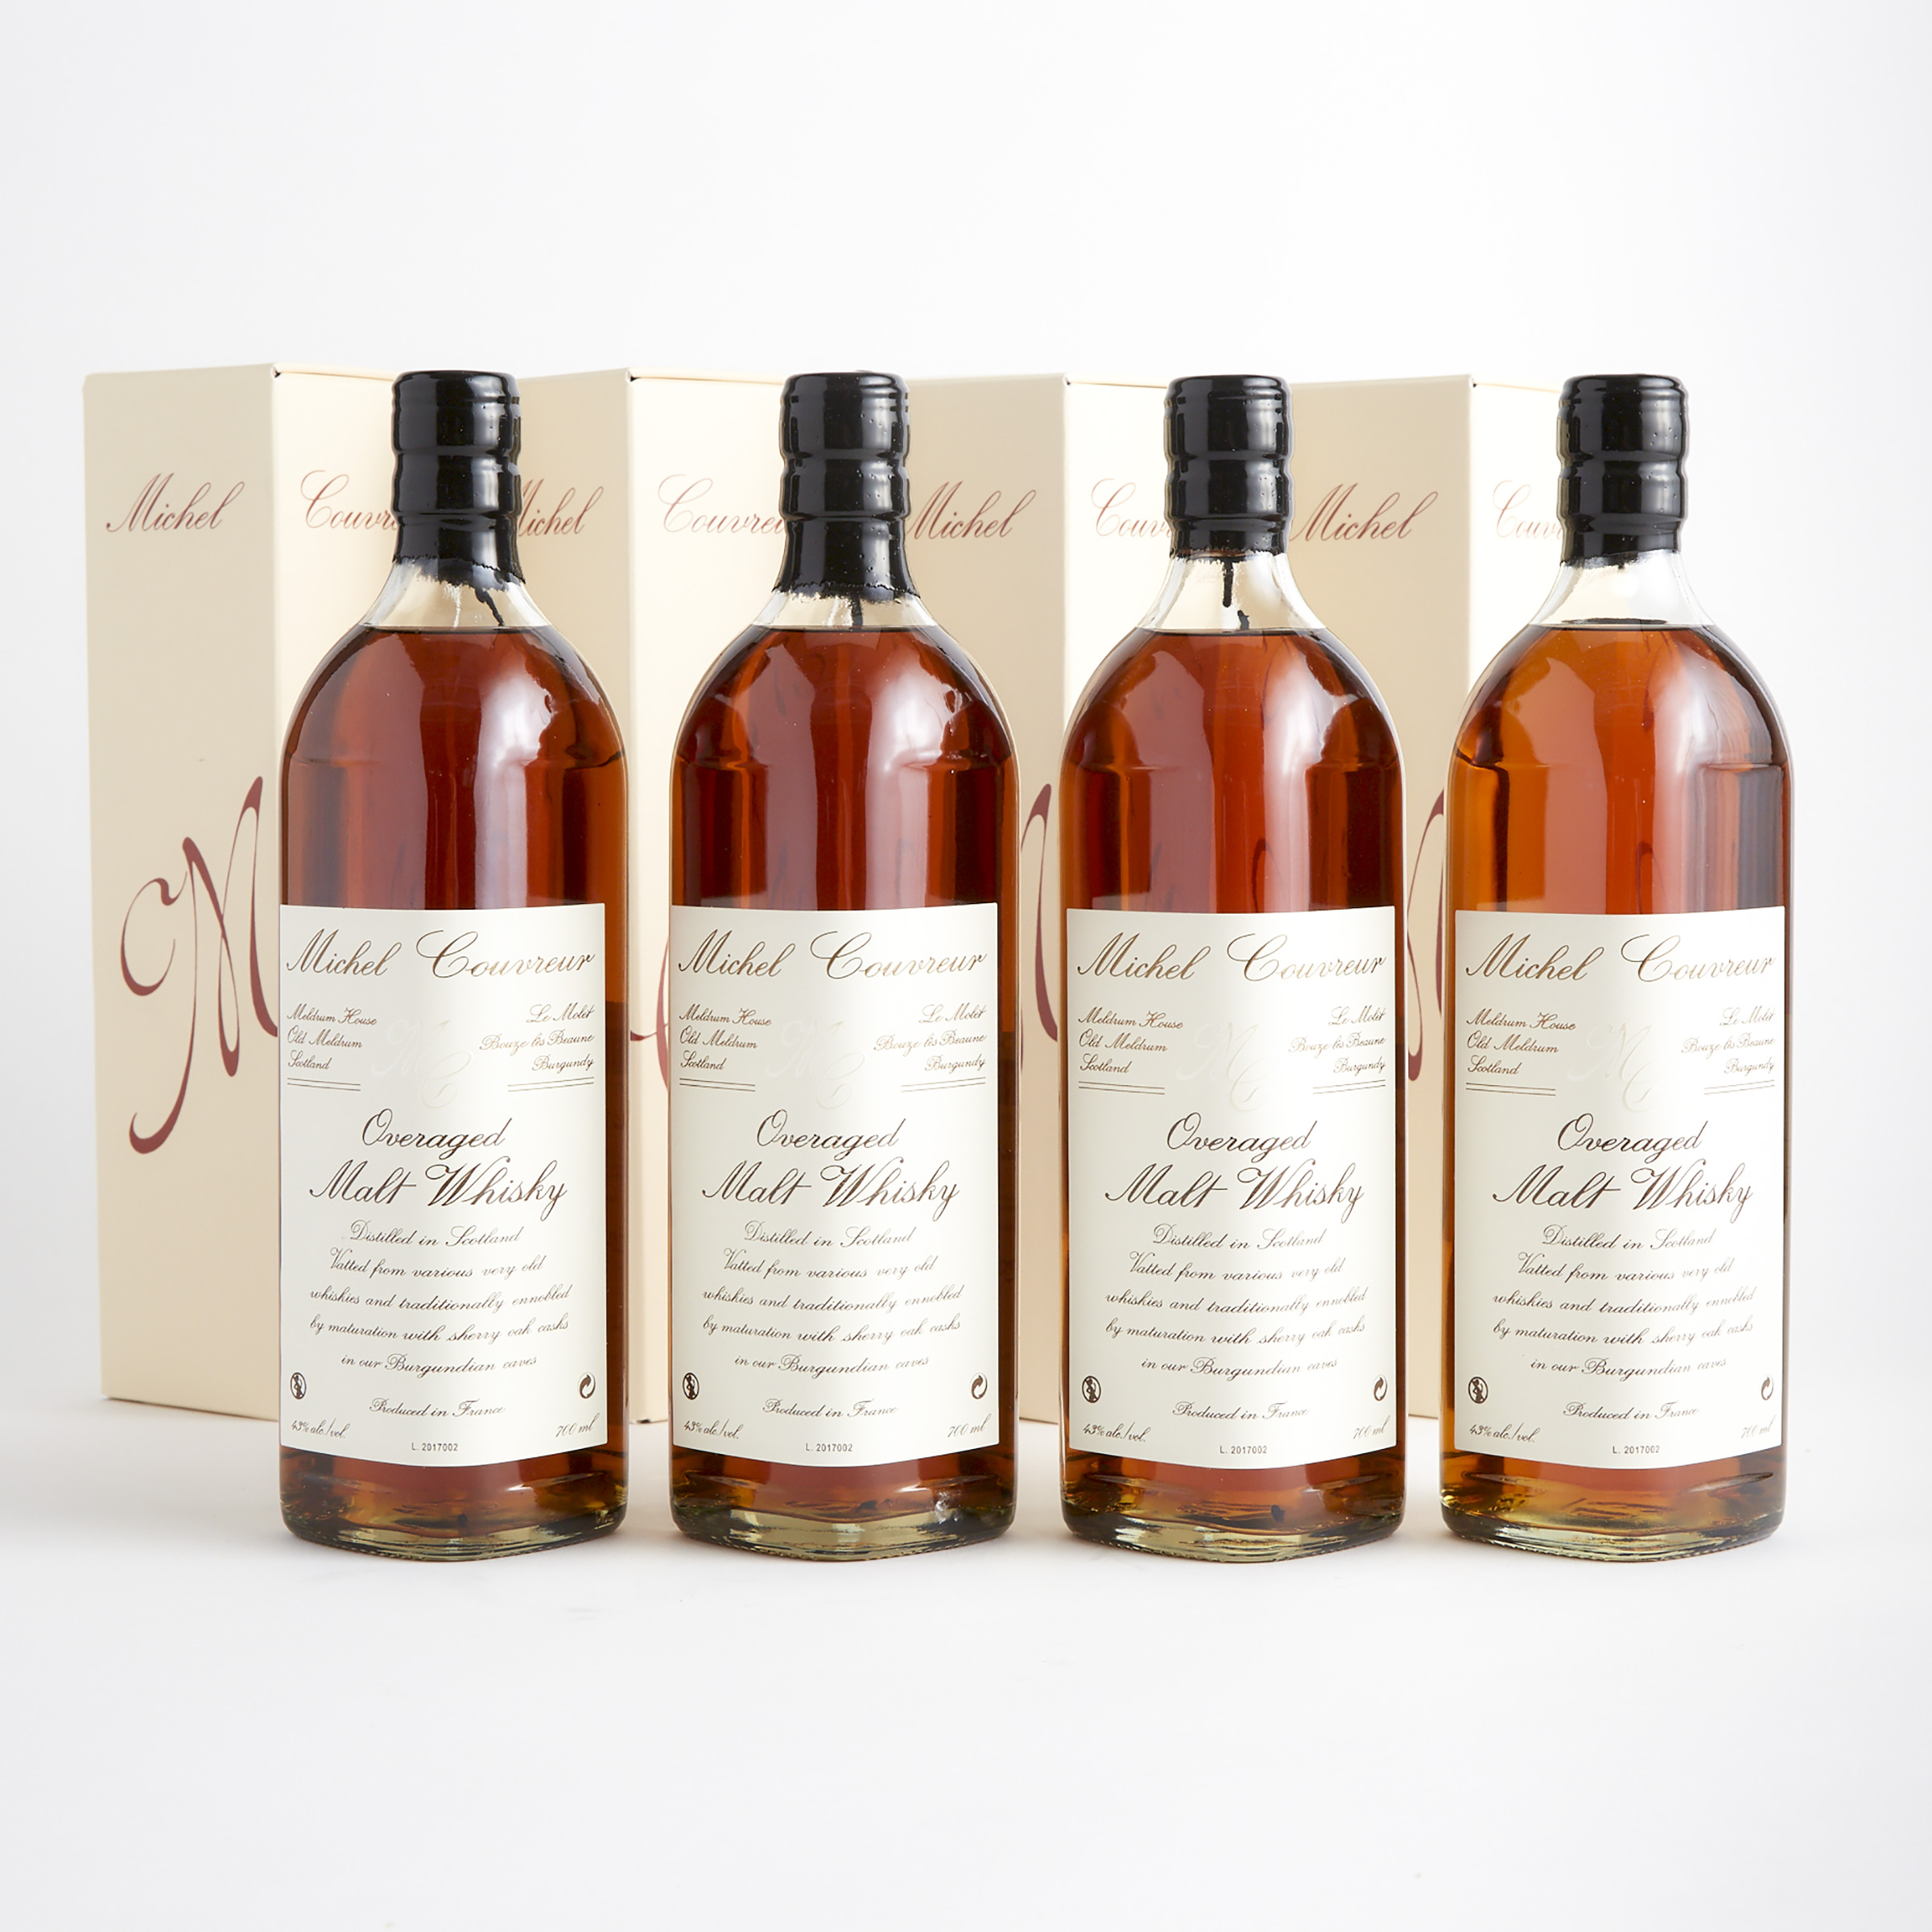 MICHEL COUVREUR OVERAGED MALT WHISKY (FOUR 700 ML)